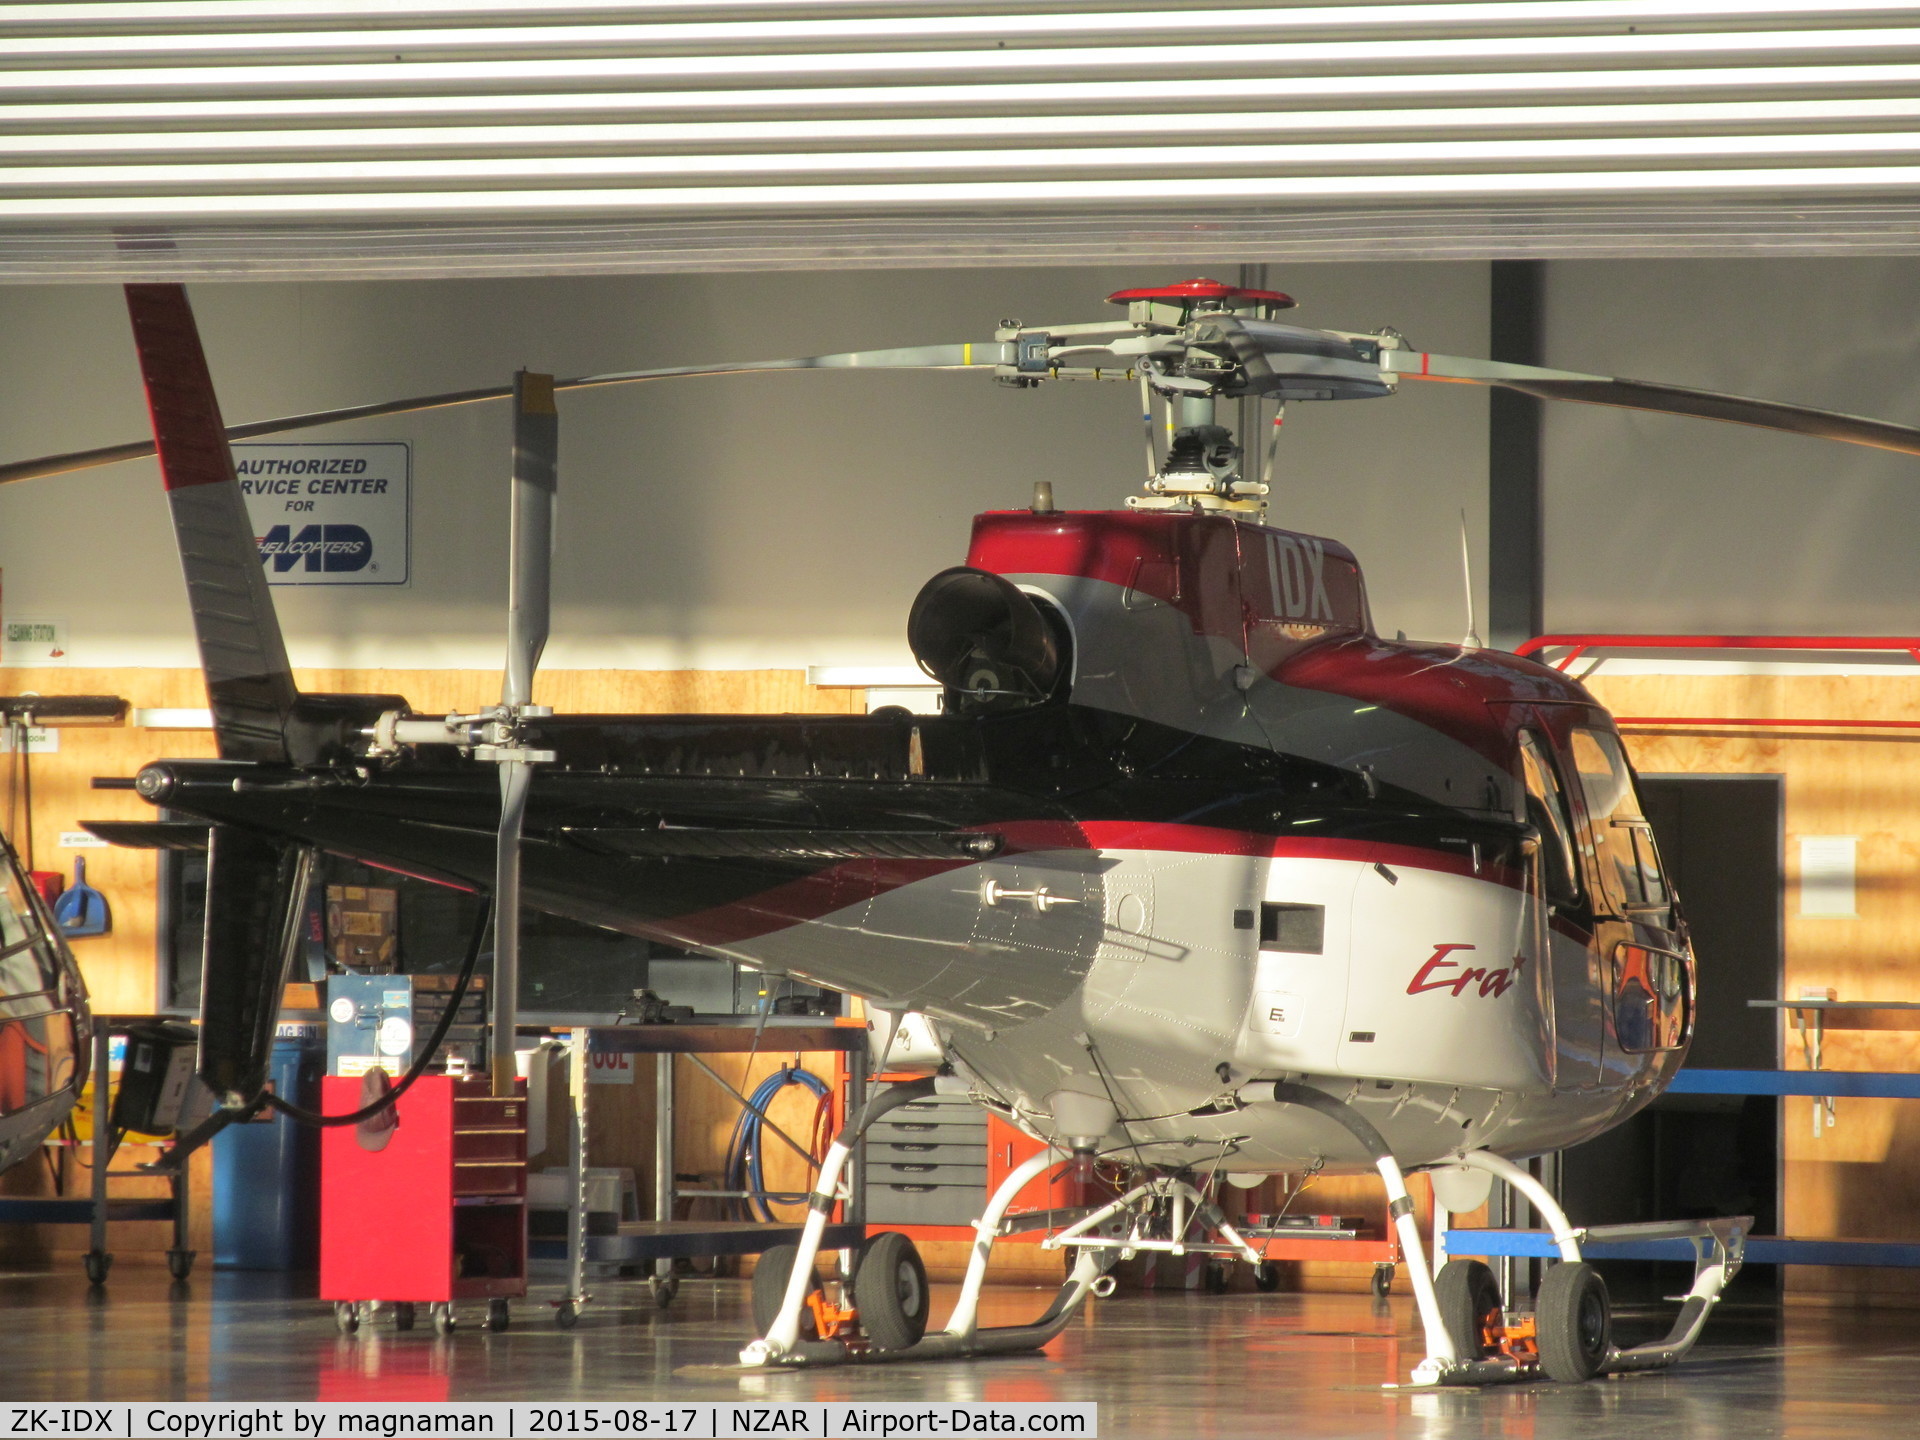 ZK-IDX, 1995 Aerospatiale AS-350B-2 Ecureuil C/N 2856, One of four ex Era helicopters imported by Oceania aviation. ZK-HFH already processed and two still wearing N reg just un-crated. IDX seen here inside hangar still in smart US colour scheme.